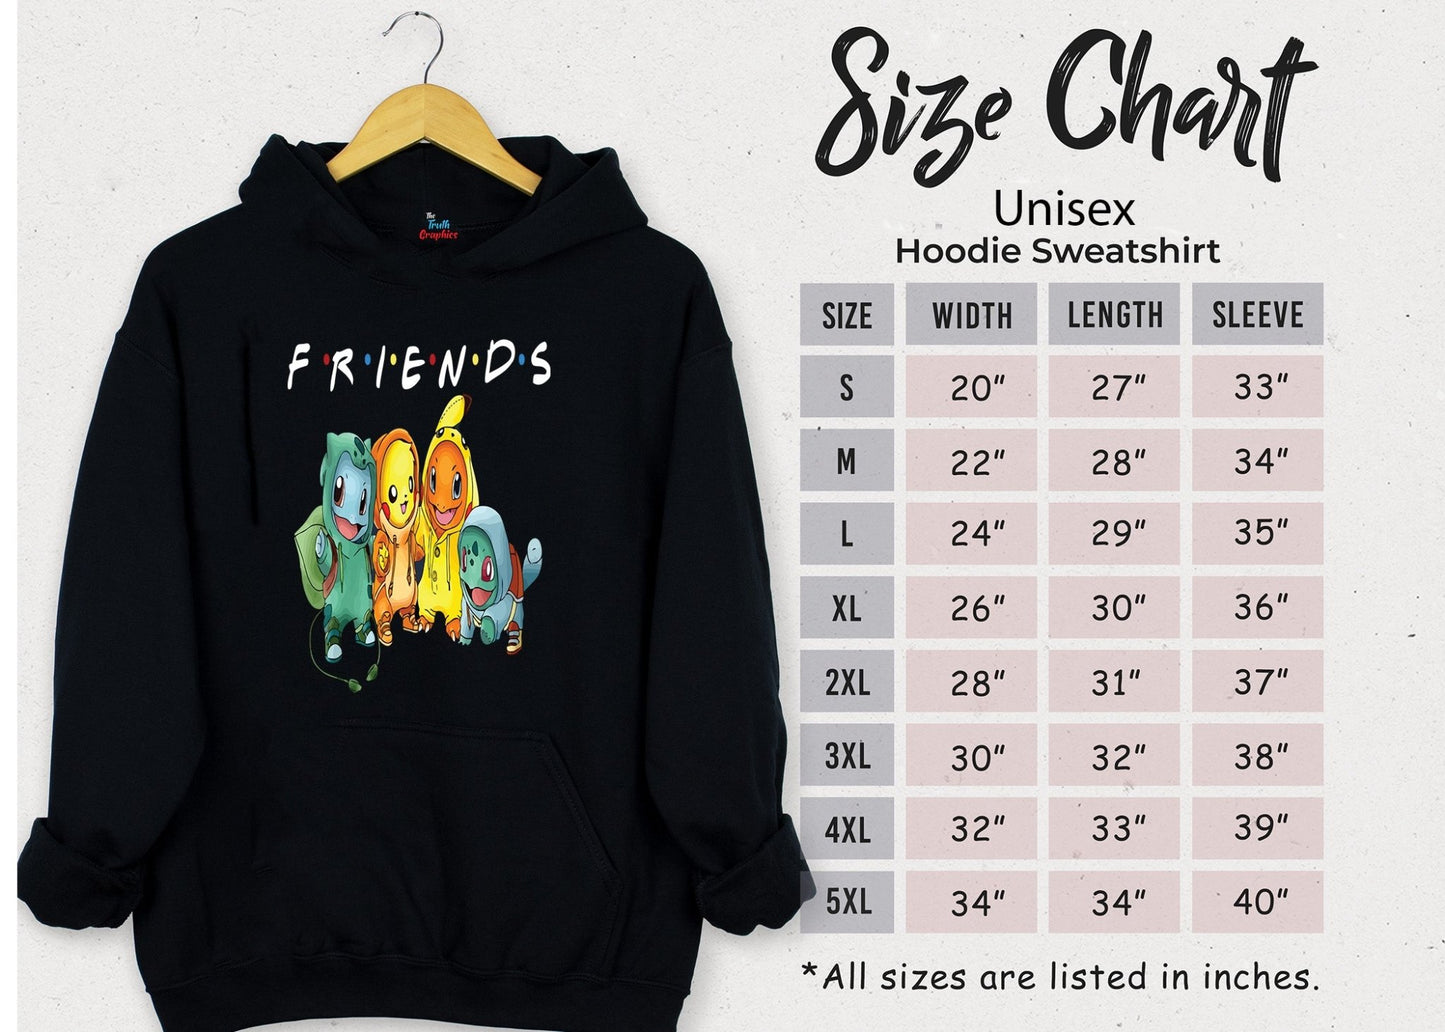 friends hoodies - pokemons - The Truth Graphics